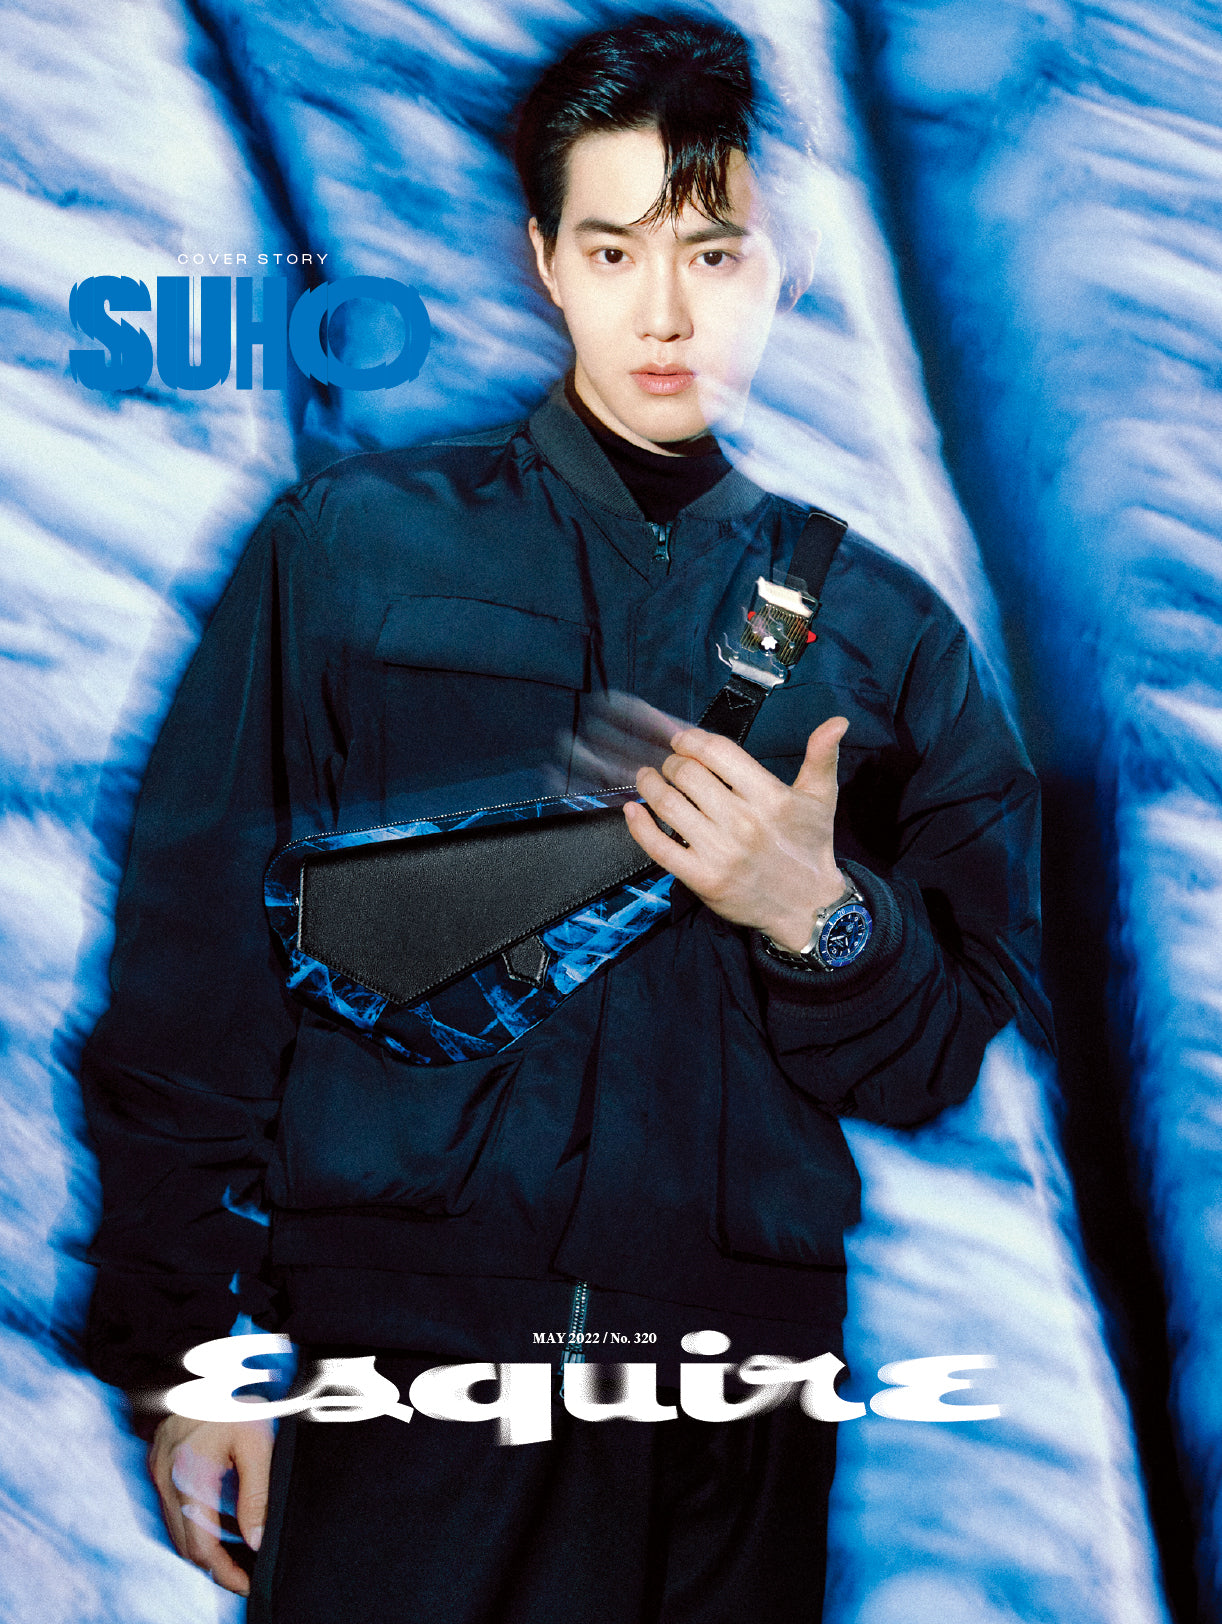 Esquire | 2022 MAY. | EXO SUHO COVER